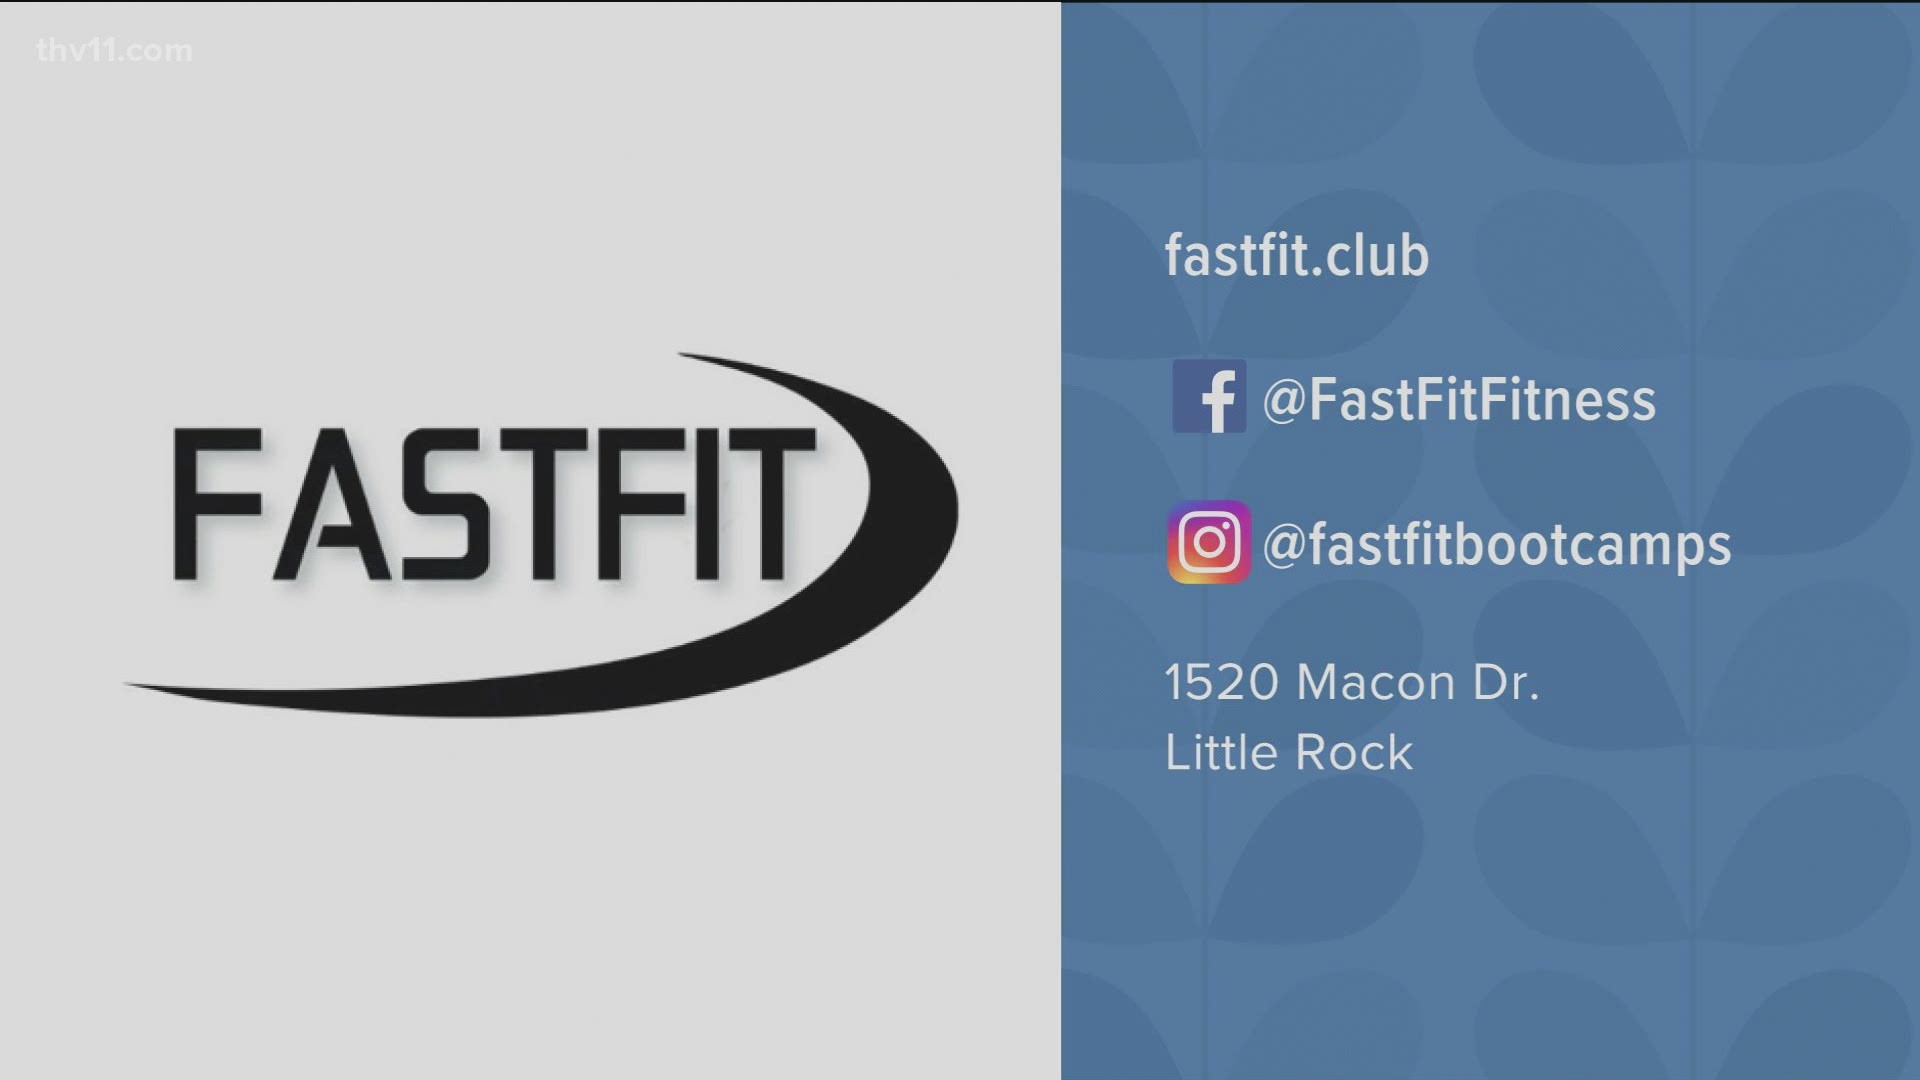 FastFit is partnering with Arkansas Food Bank to deliver turkeys on Thanksgiving. Donate a turkey and join Jeff for a workout at 8:30 a.m. on Nov. 26.